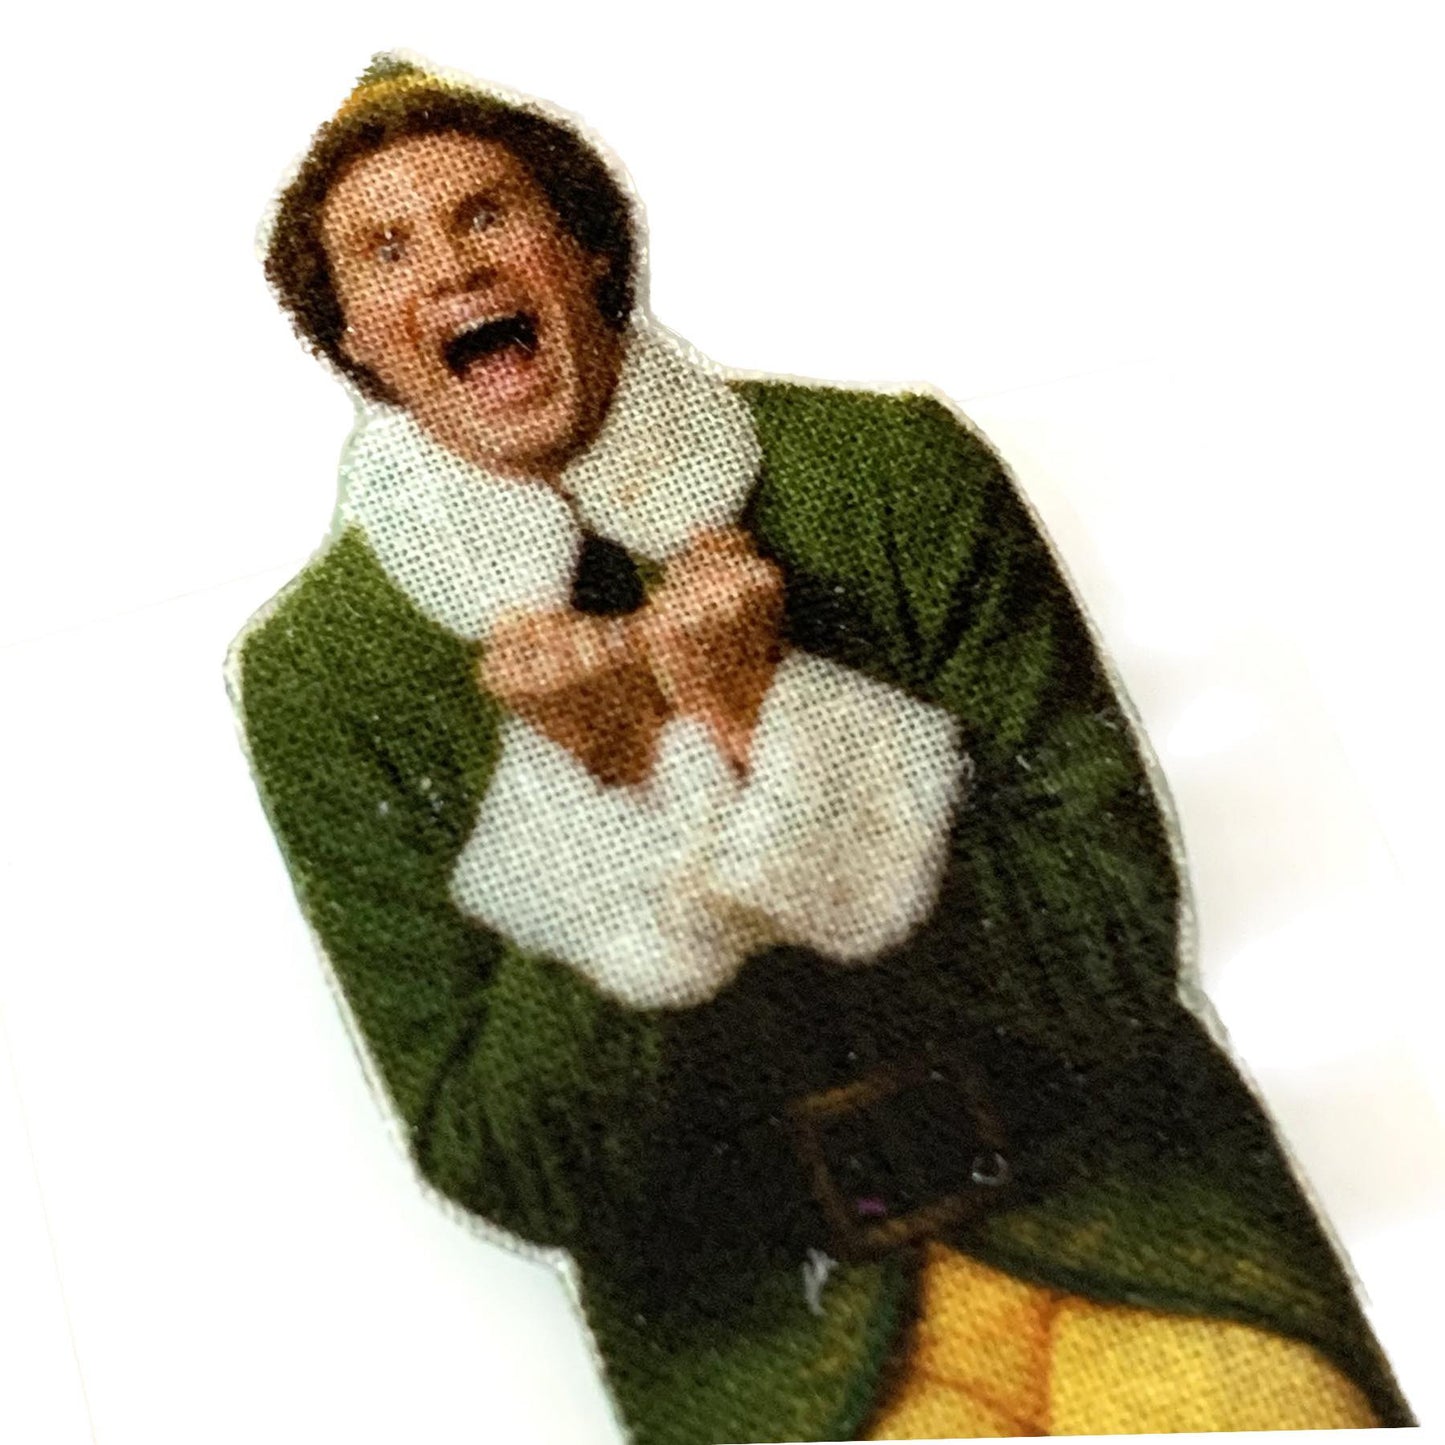 THIS BIRD HAS FLOWN- Excited "Buddy the Elf" Fabric Remnant Christmas Brooches